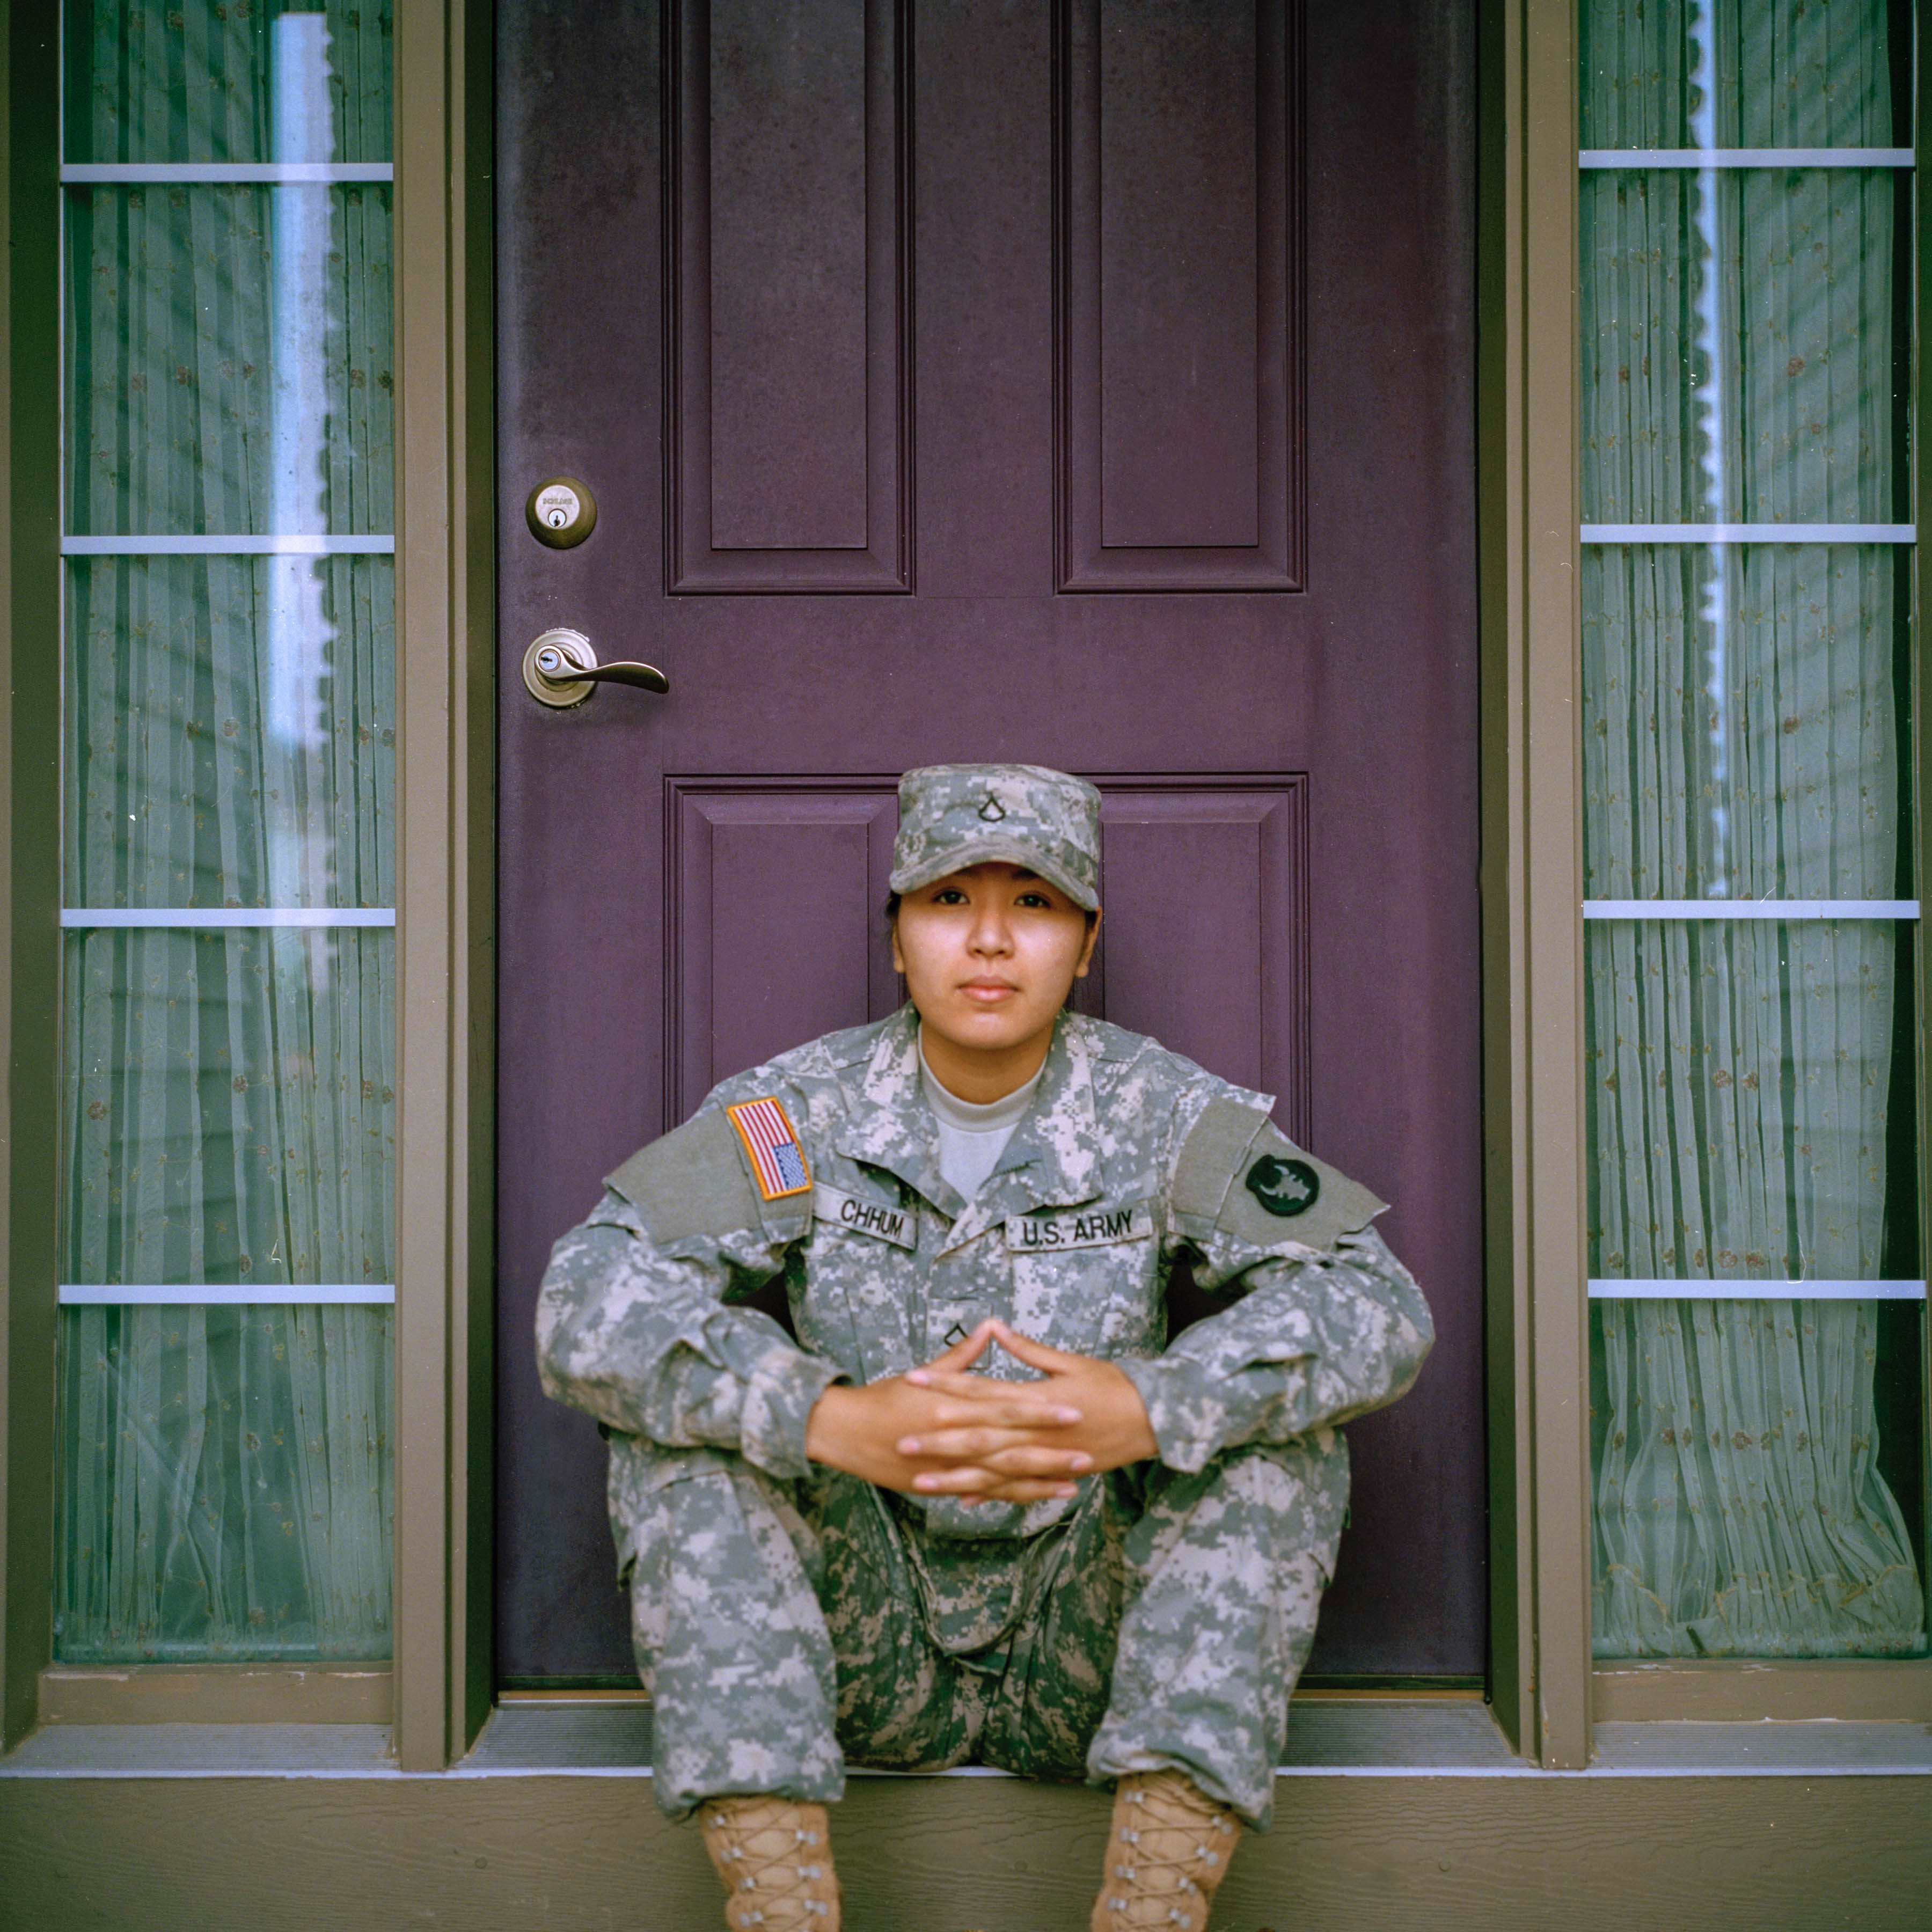 Female service member in uniform sitting on porch step in front of door; image by Jessica Radanavong, via Unsplash.com.